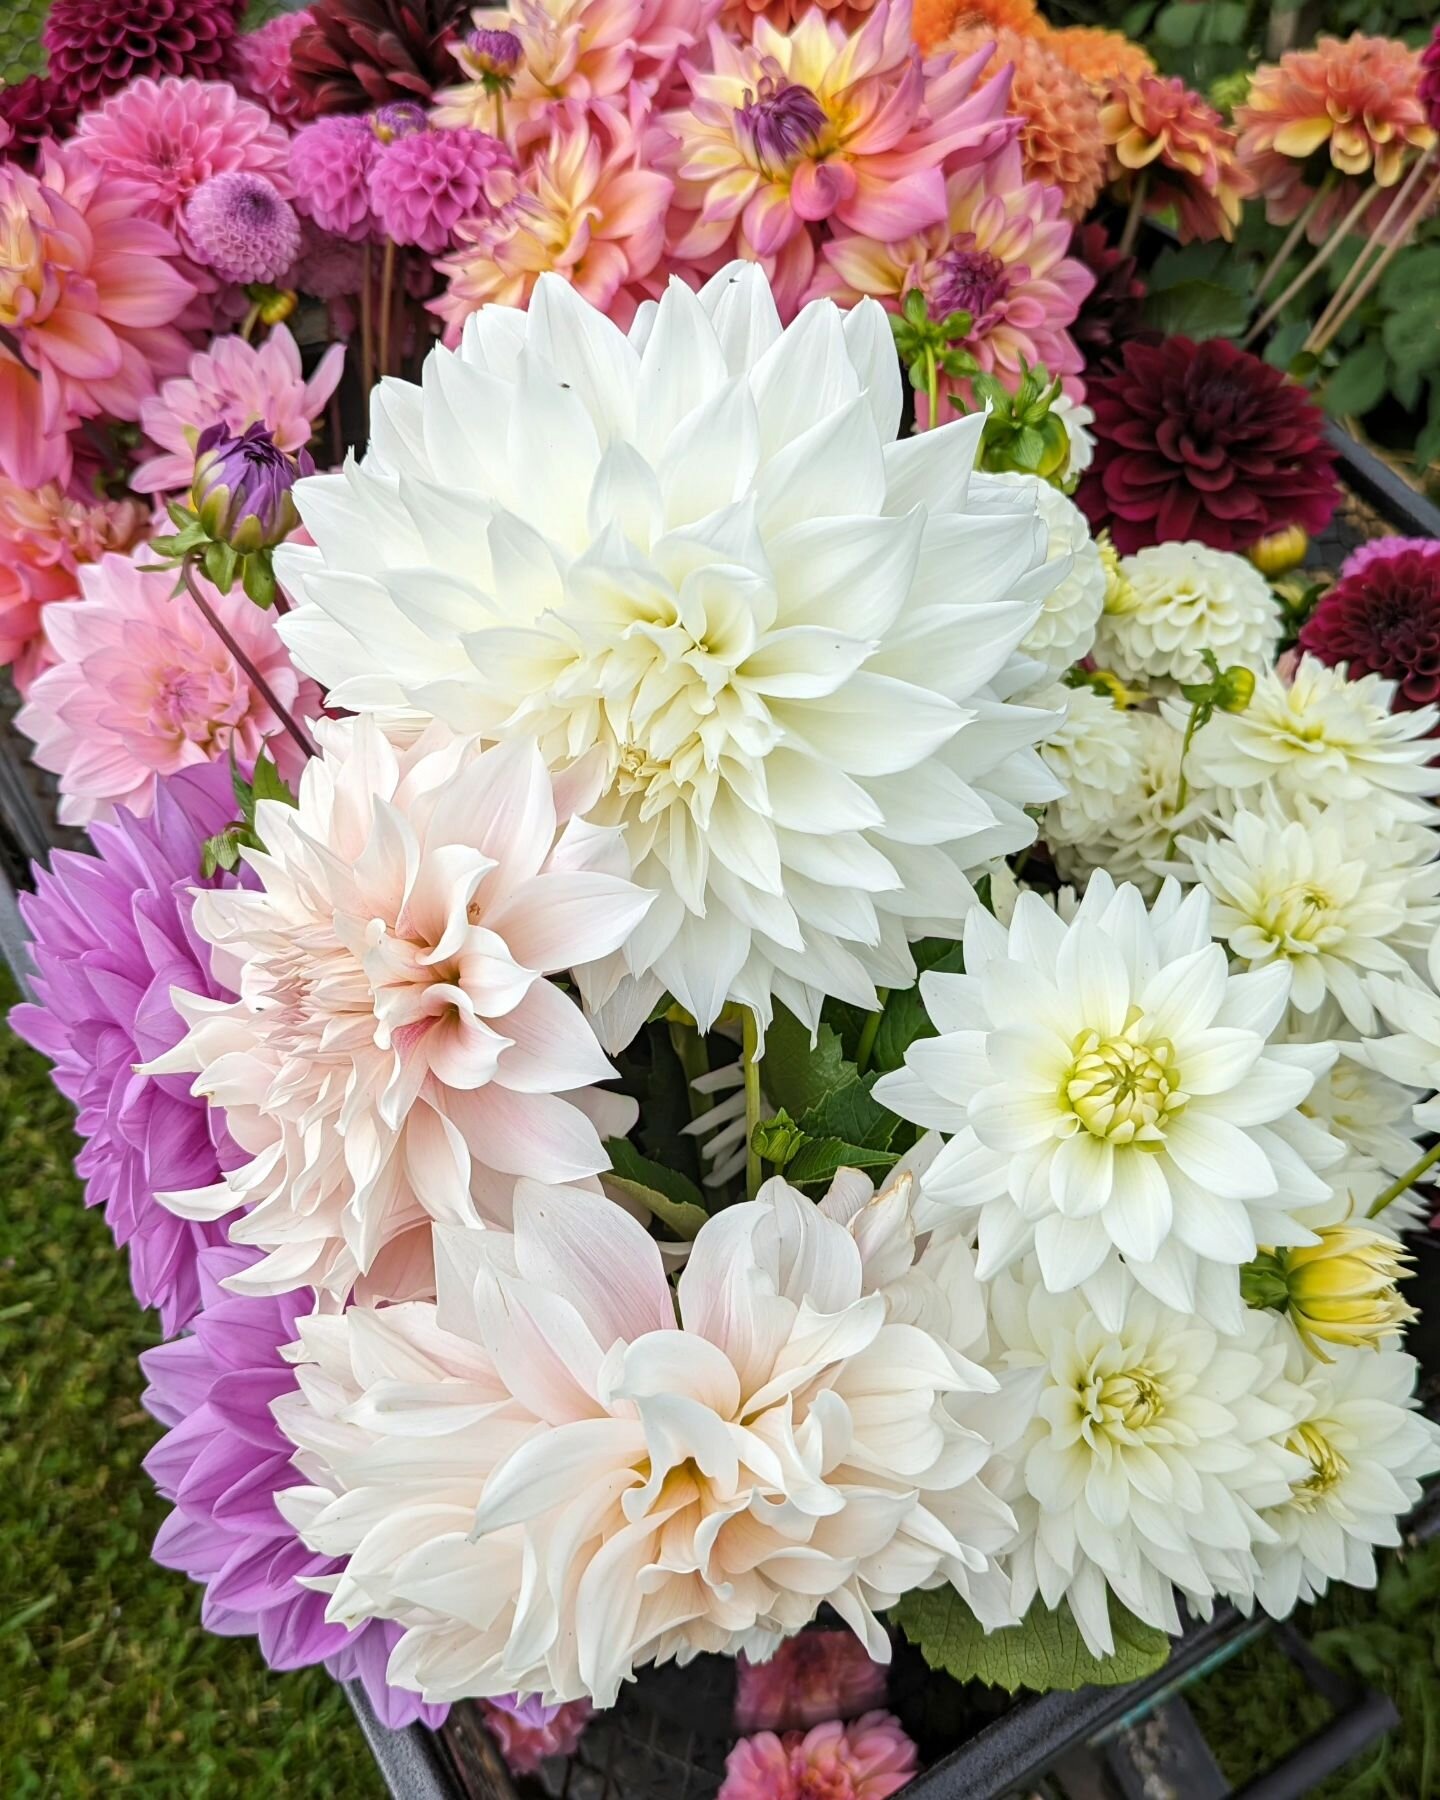 💐UPDATE FROM THE GATE 💐
The flowers have been cut and are resting in the flower shed before I make them into bouquets later today
💐💐💐
The Flower Stall will be stocked and open Friday and Saturday from 8.00am . It's self-serve, so you can scan th